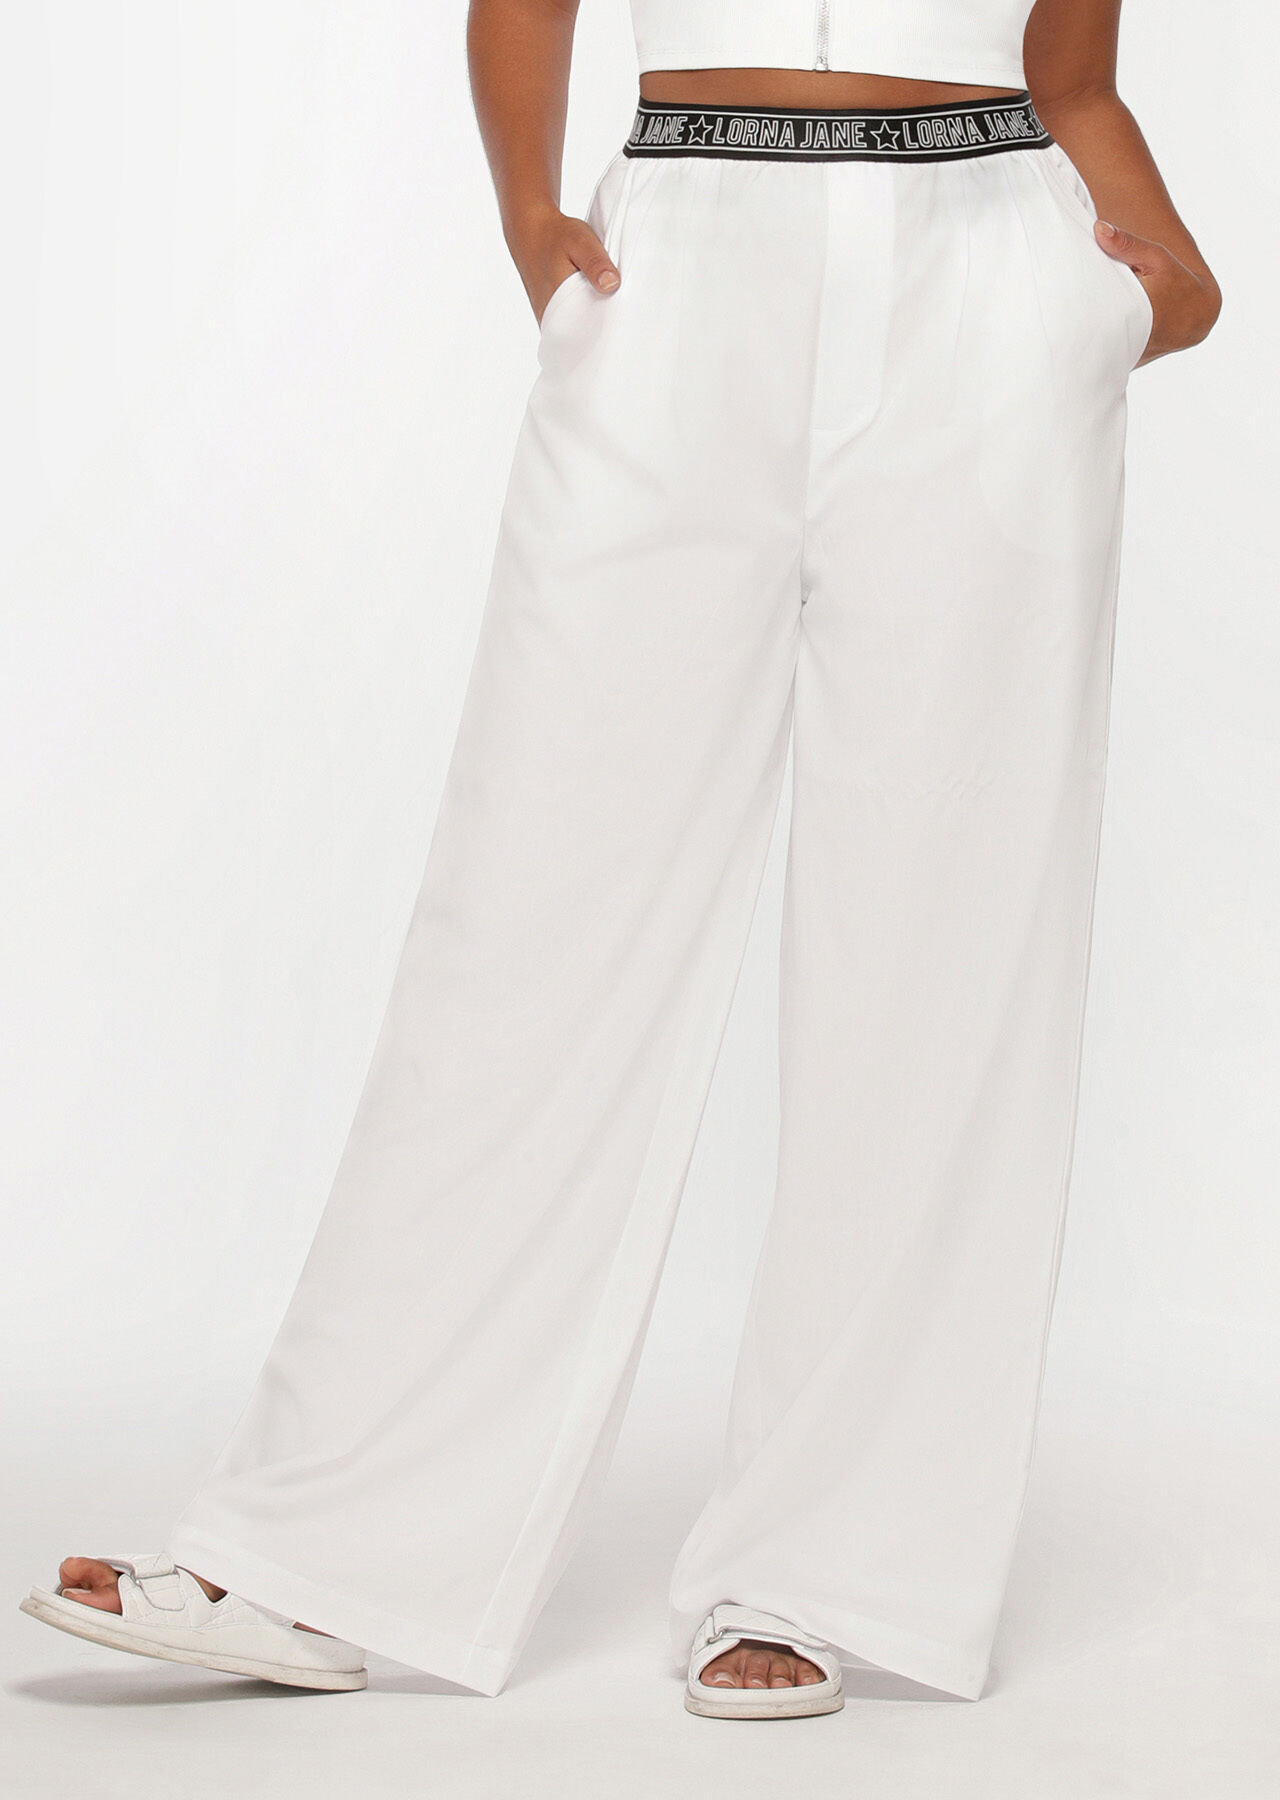 Buy Off-White Trousers & Pants for Women by PROJECT EVE Online | Ajio.com